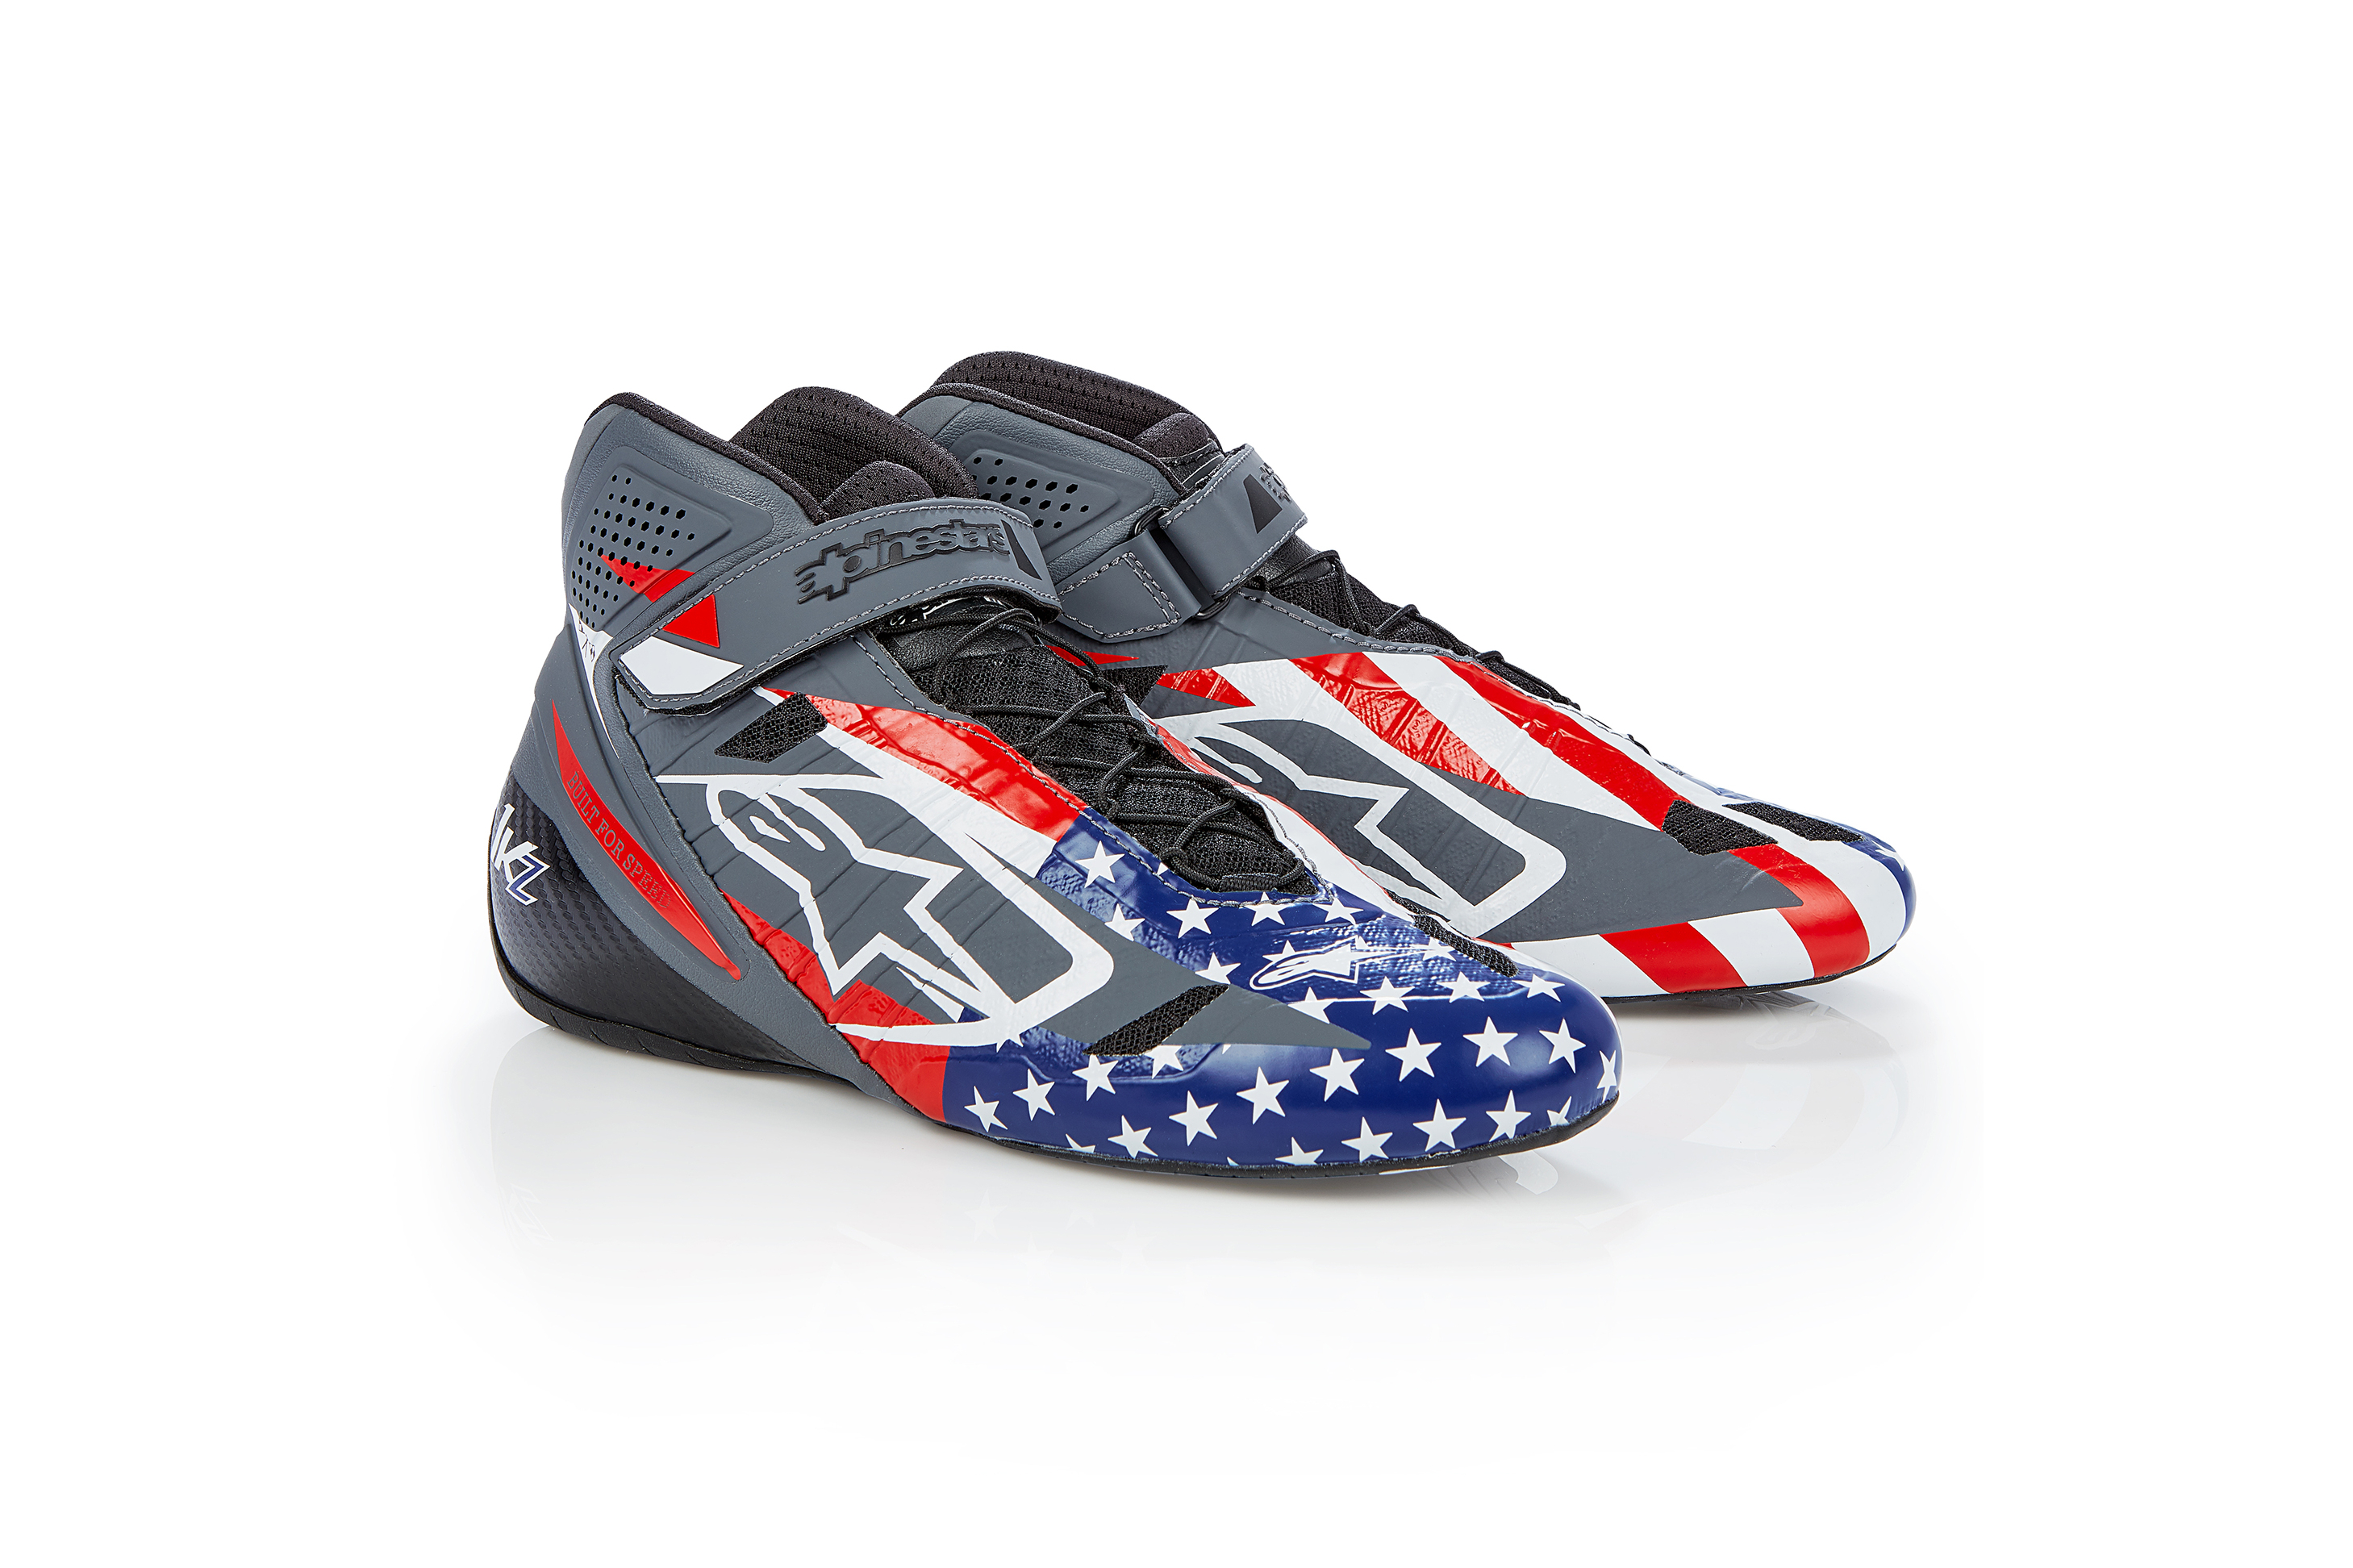 Alpine Car Racing Chunky Sneakers Camo Flag Pattern Navy Max Soul Shoes -  Freedomdesign